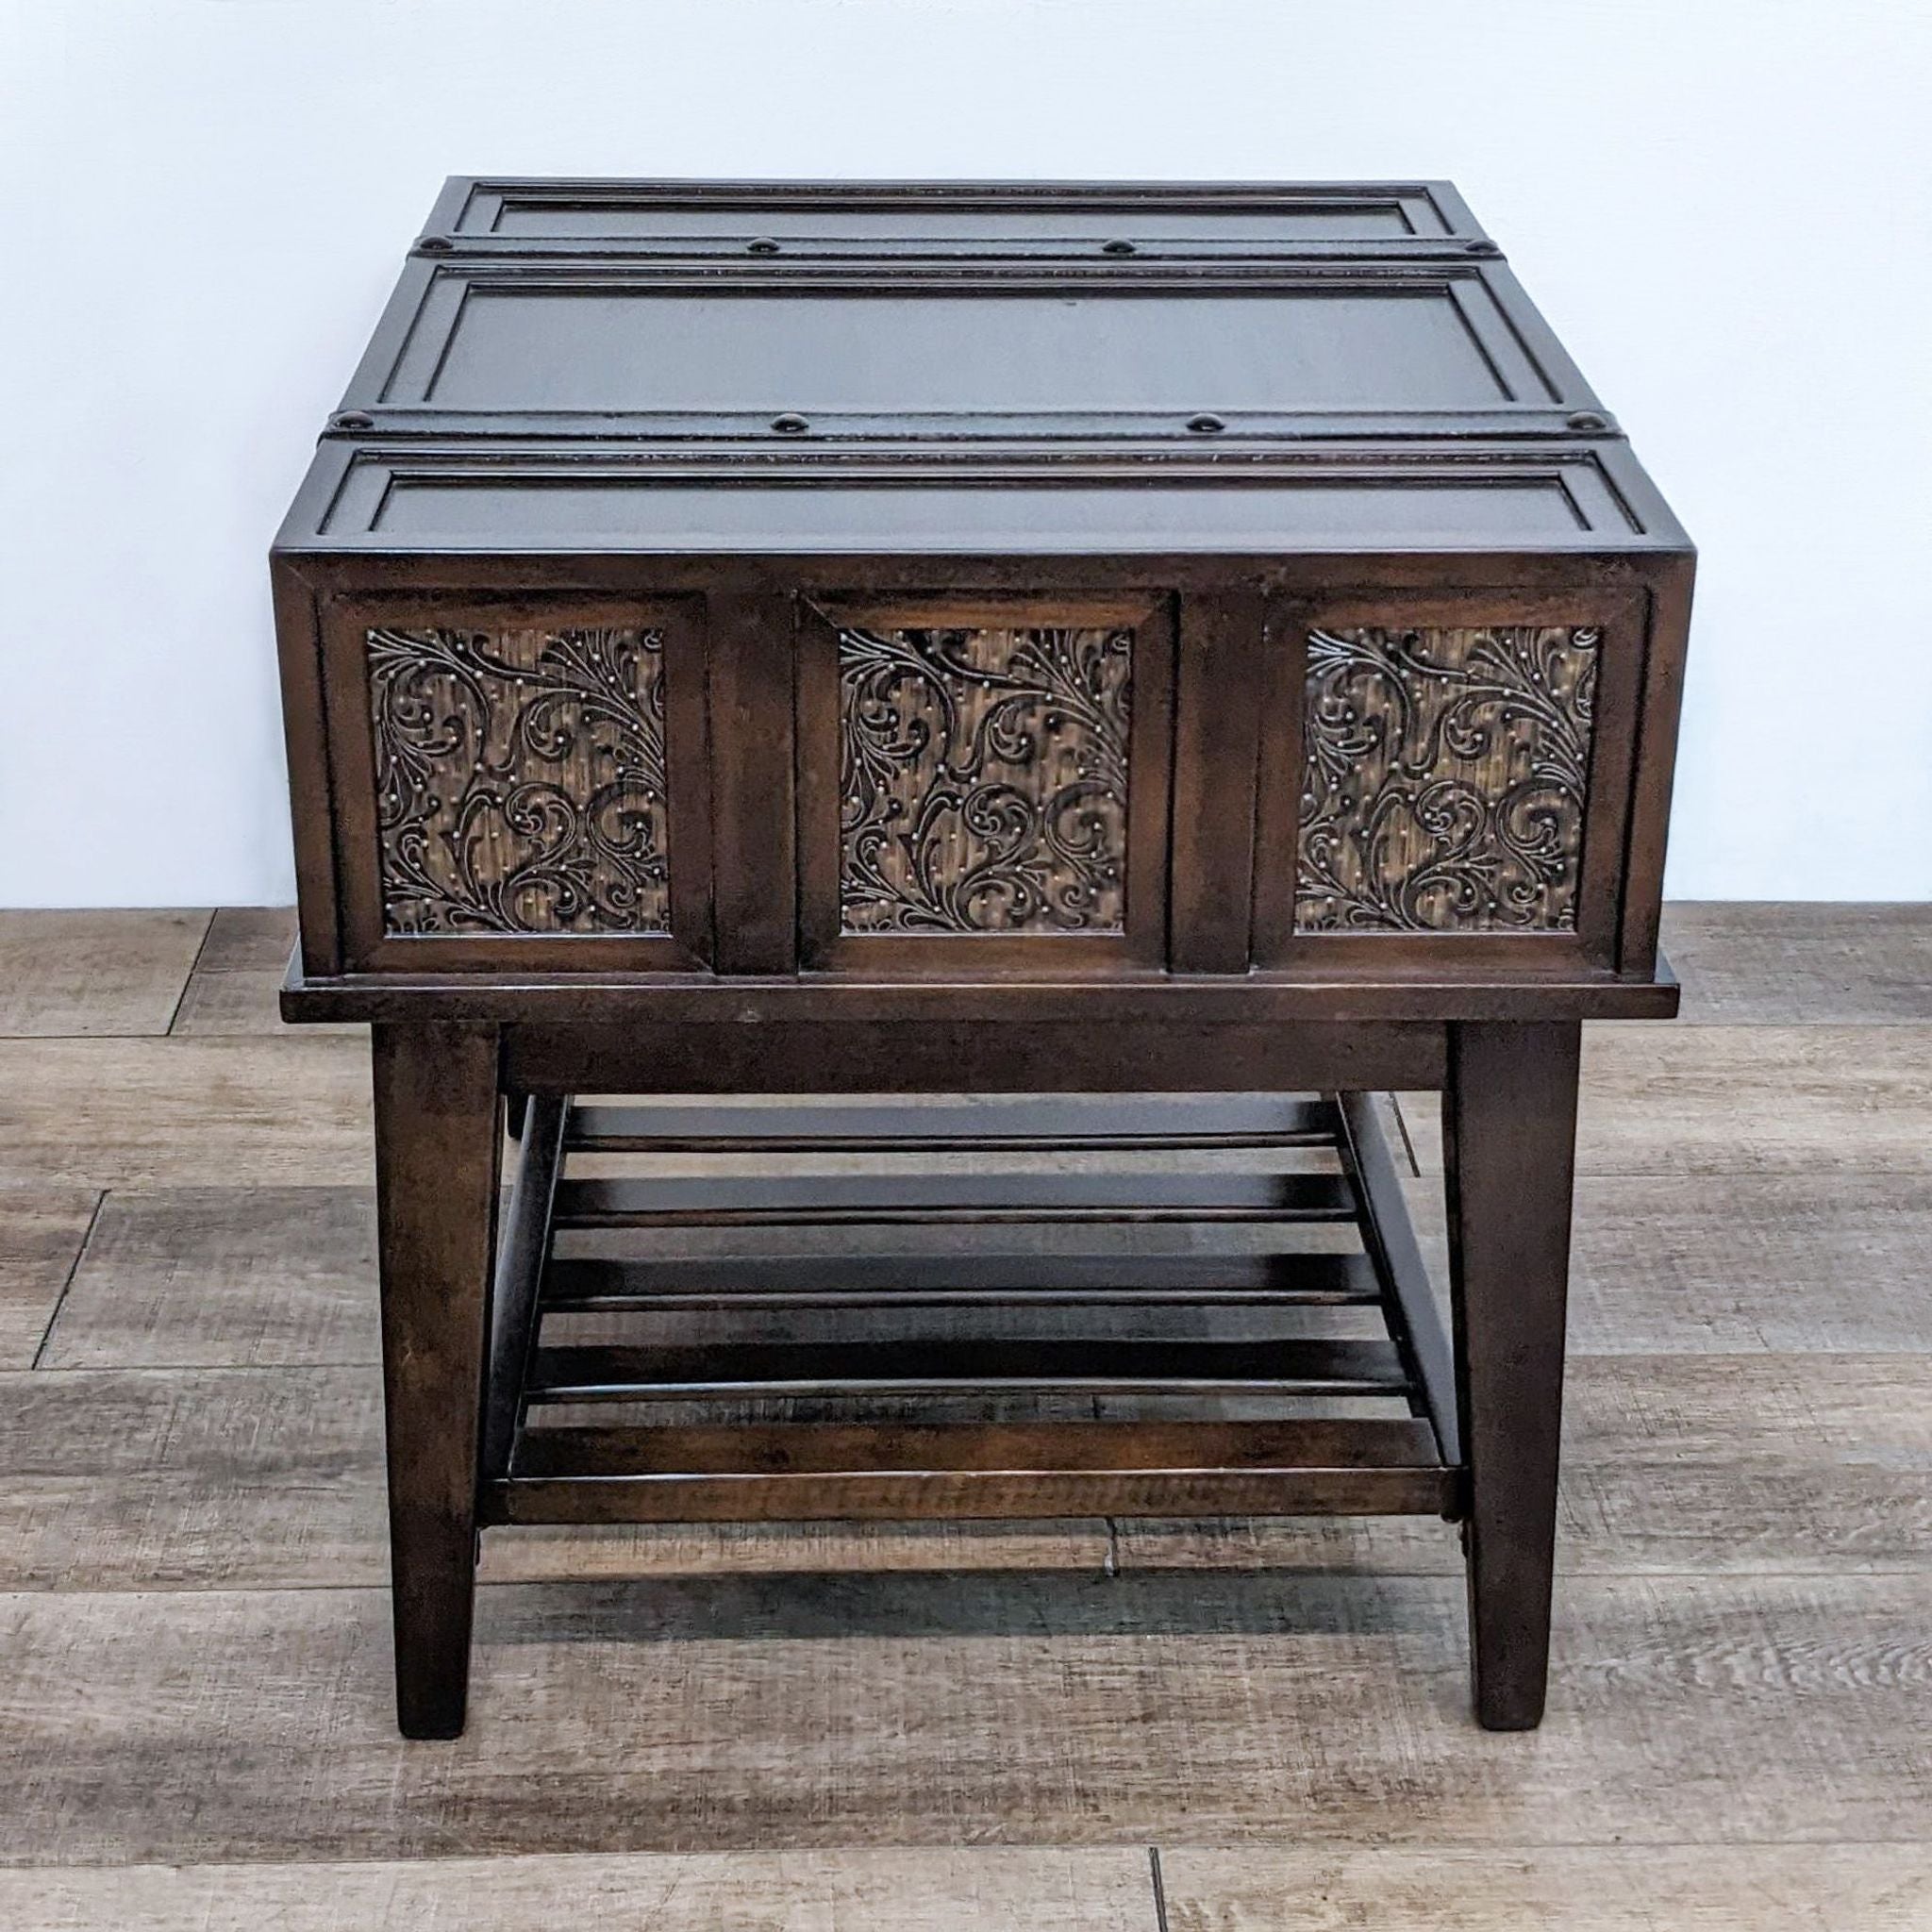 Reperch brand end table with decorative drawer fronts, leather straps, and slatted lower shelf on a wooden floor.